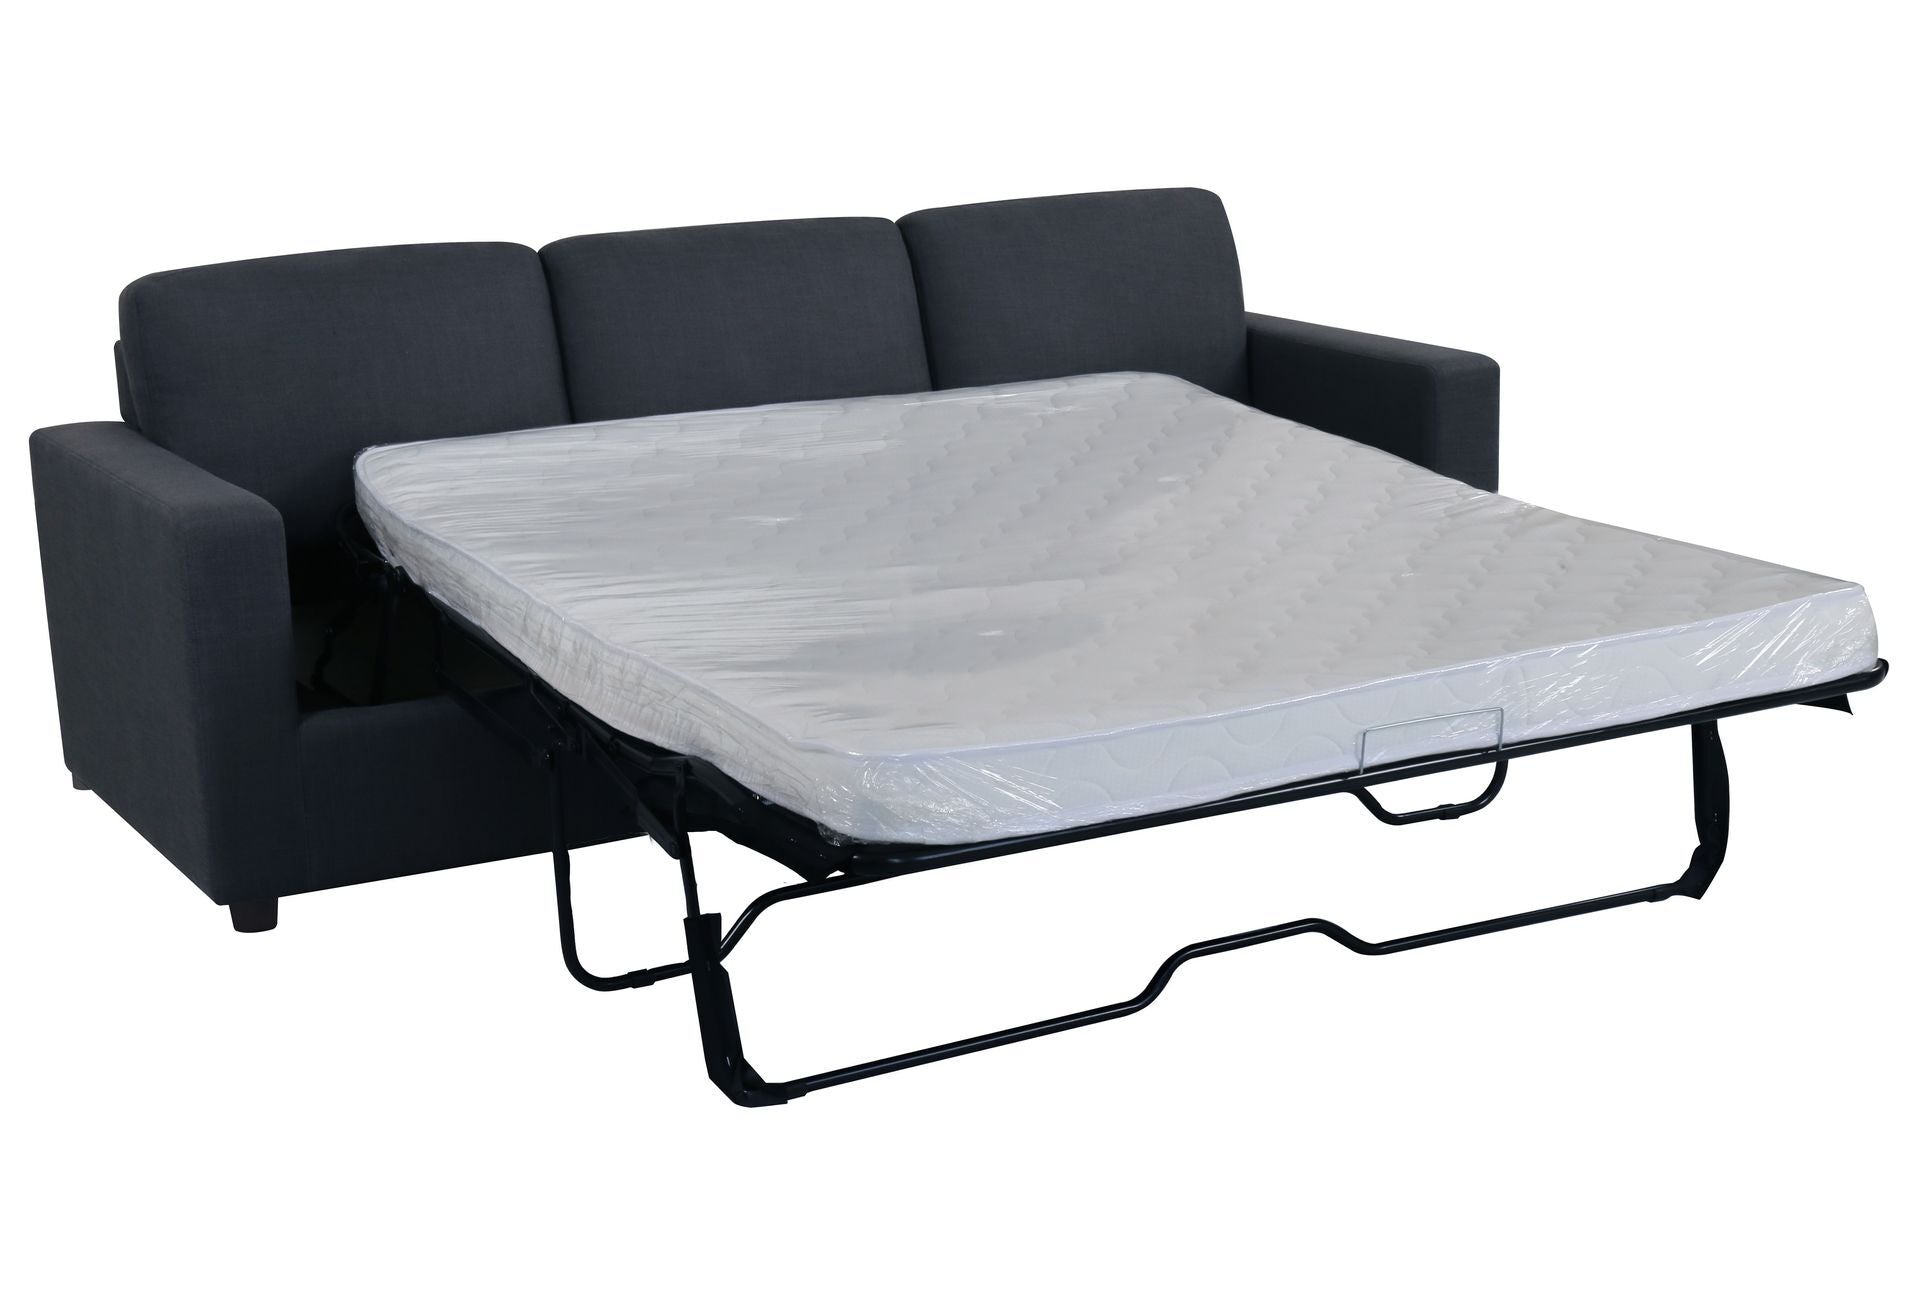 Cloud 3 Seater Sofa Bed With Chaise - Queen Size